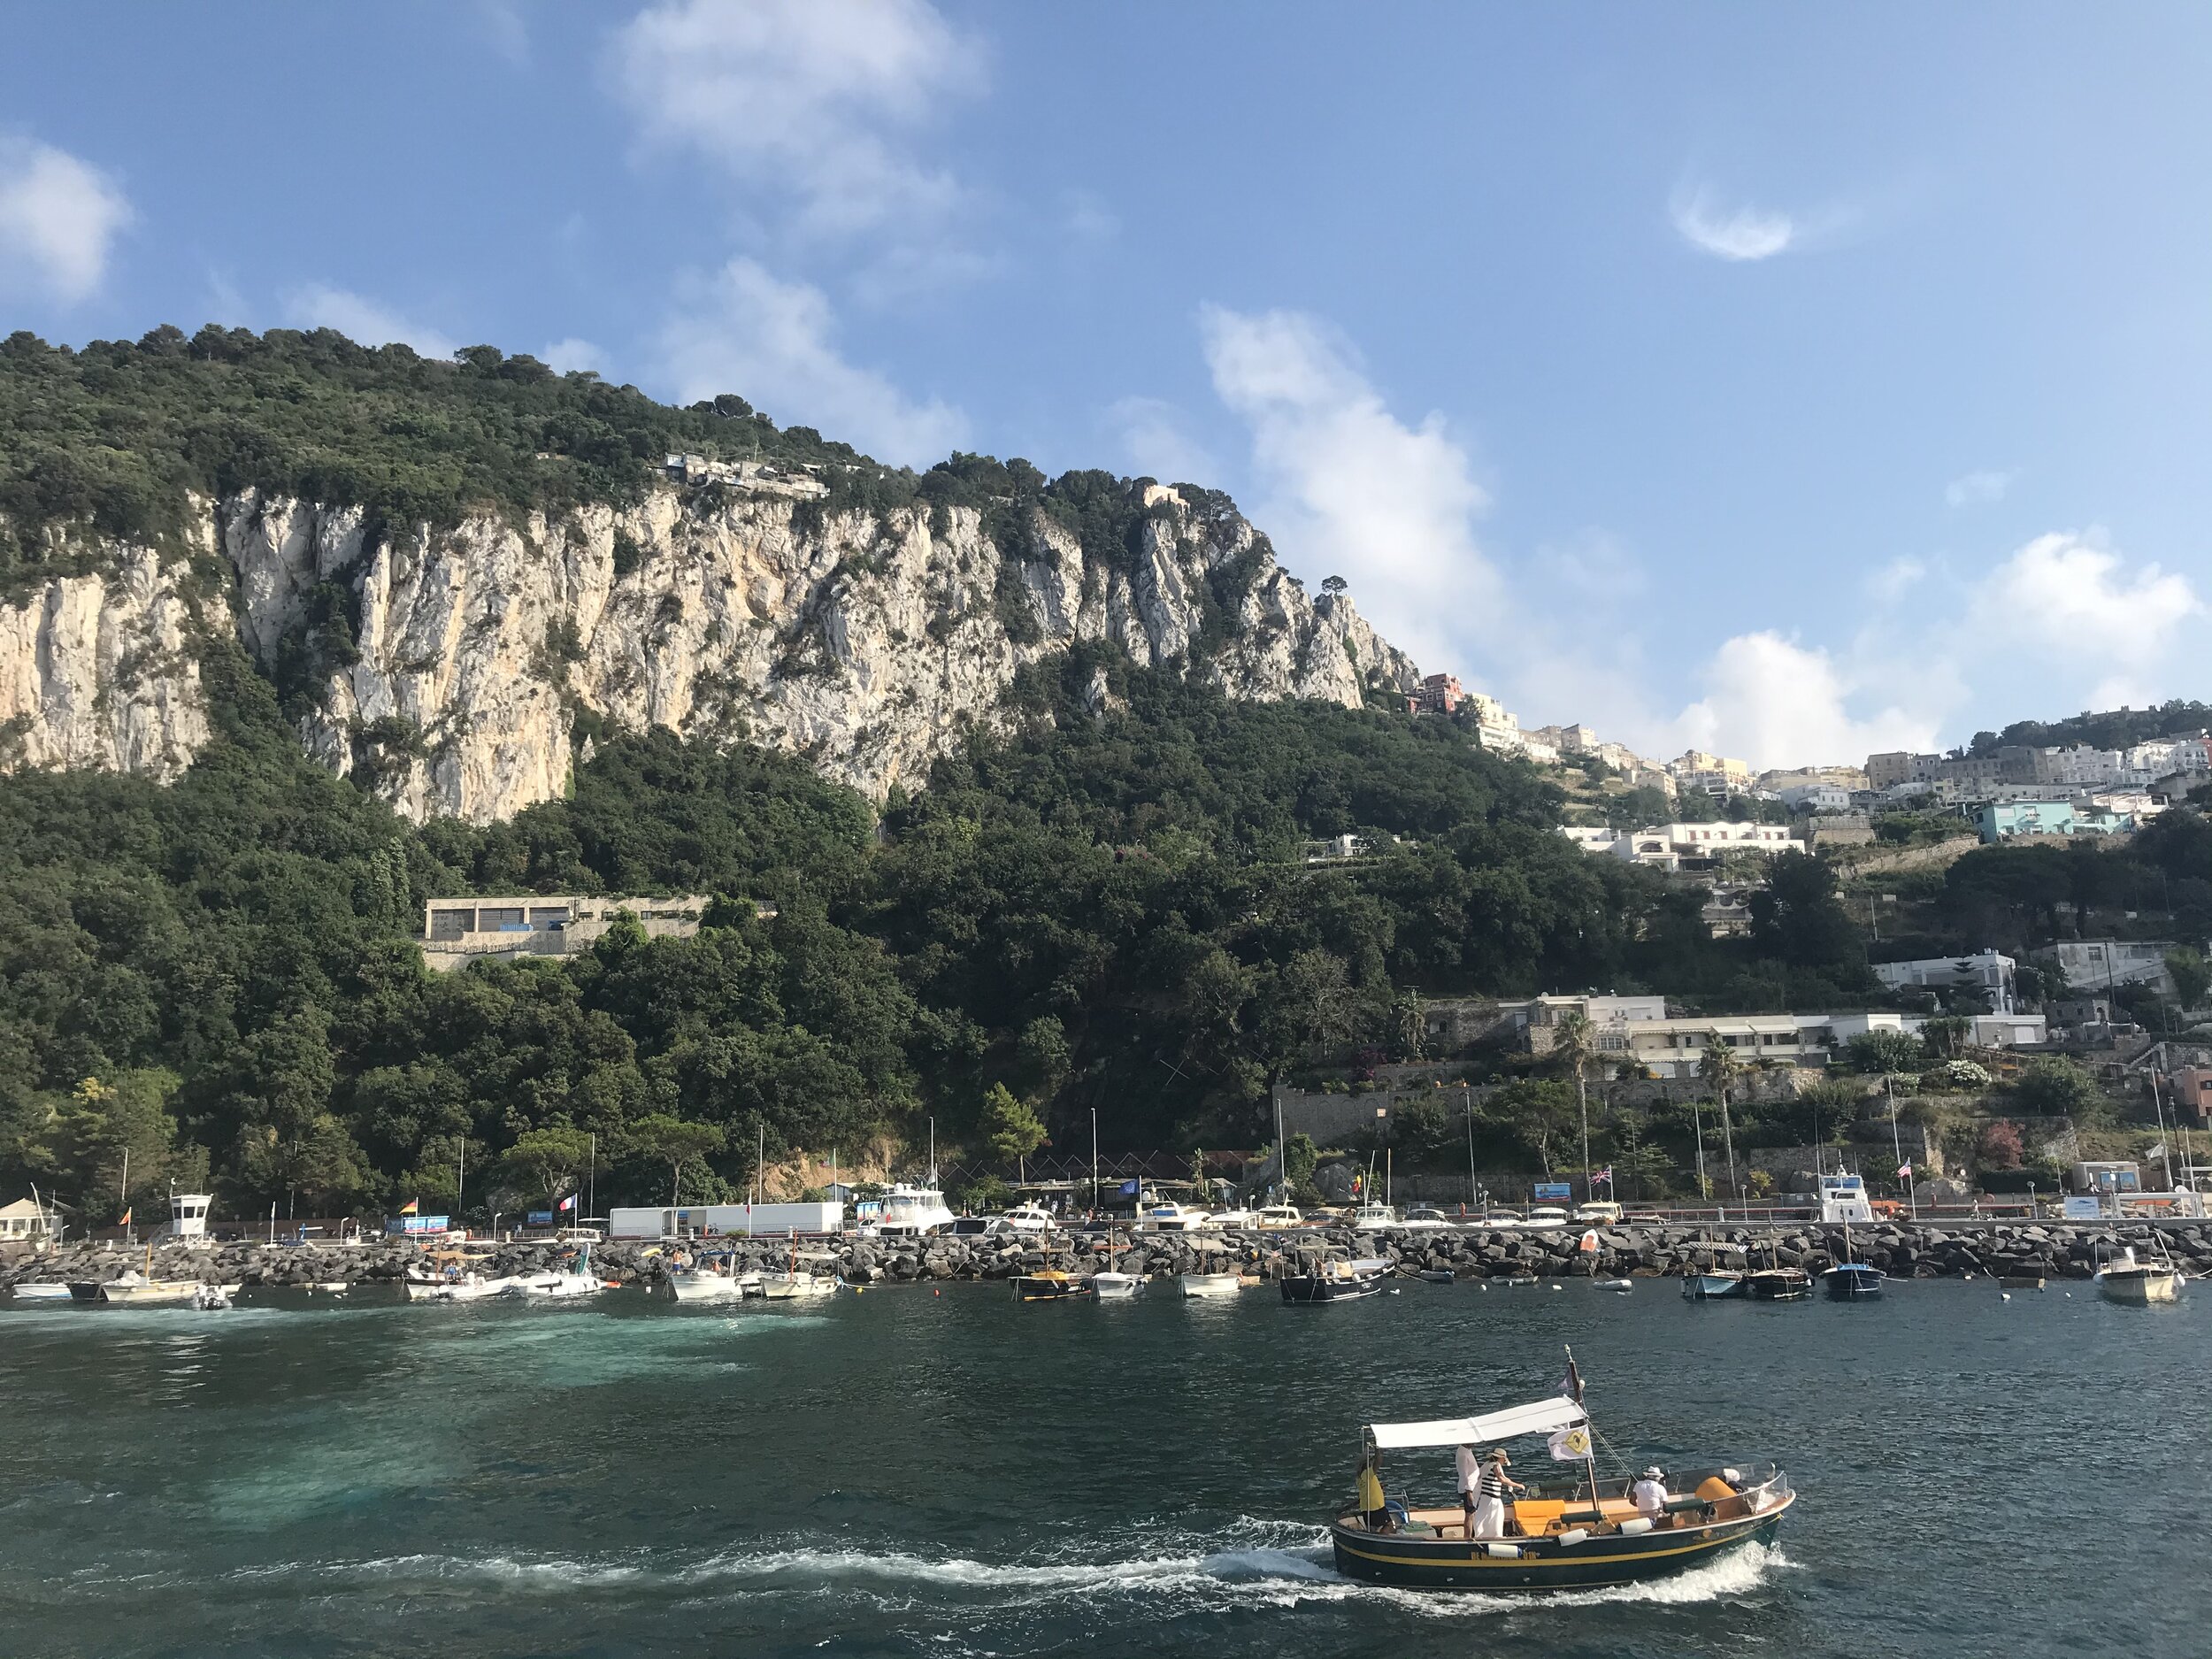 Capri, Ischia or Procida: Which of Naples’ Islands Should You Visit?